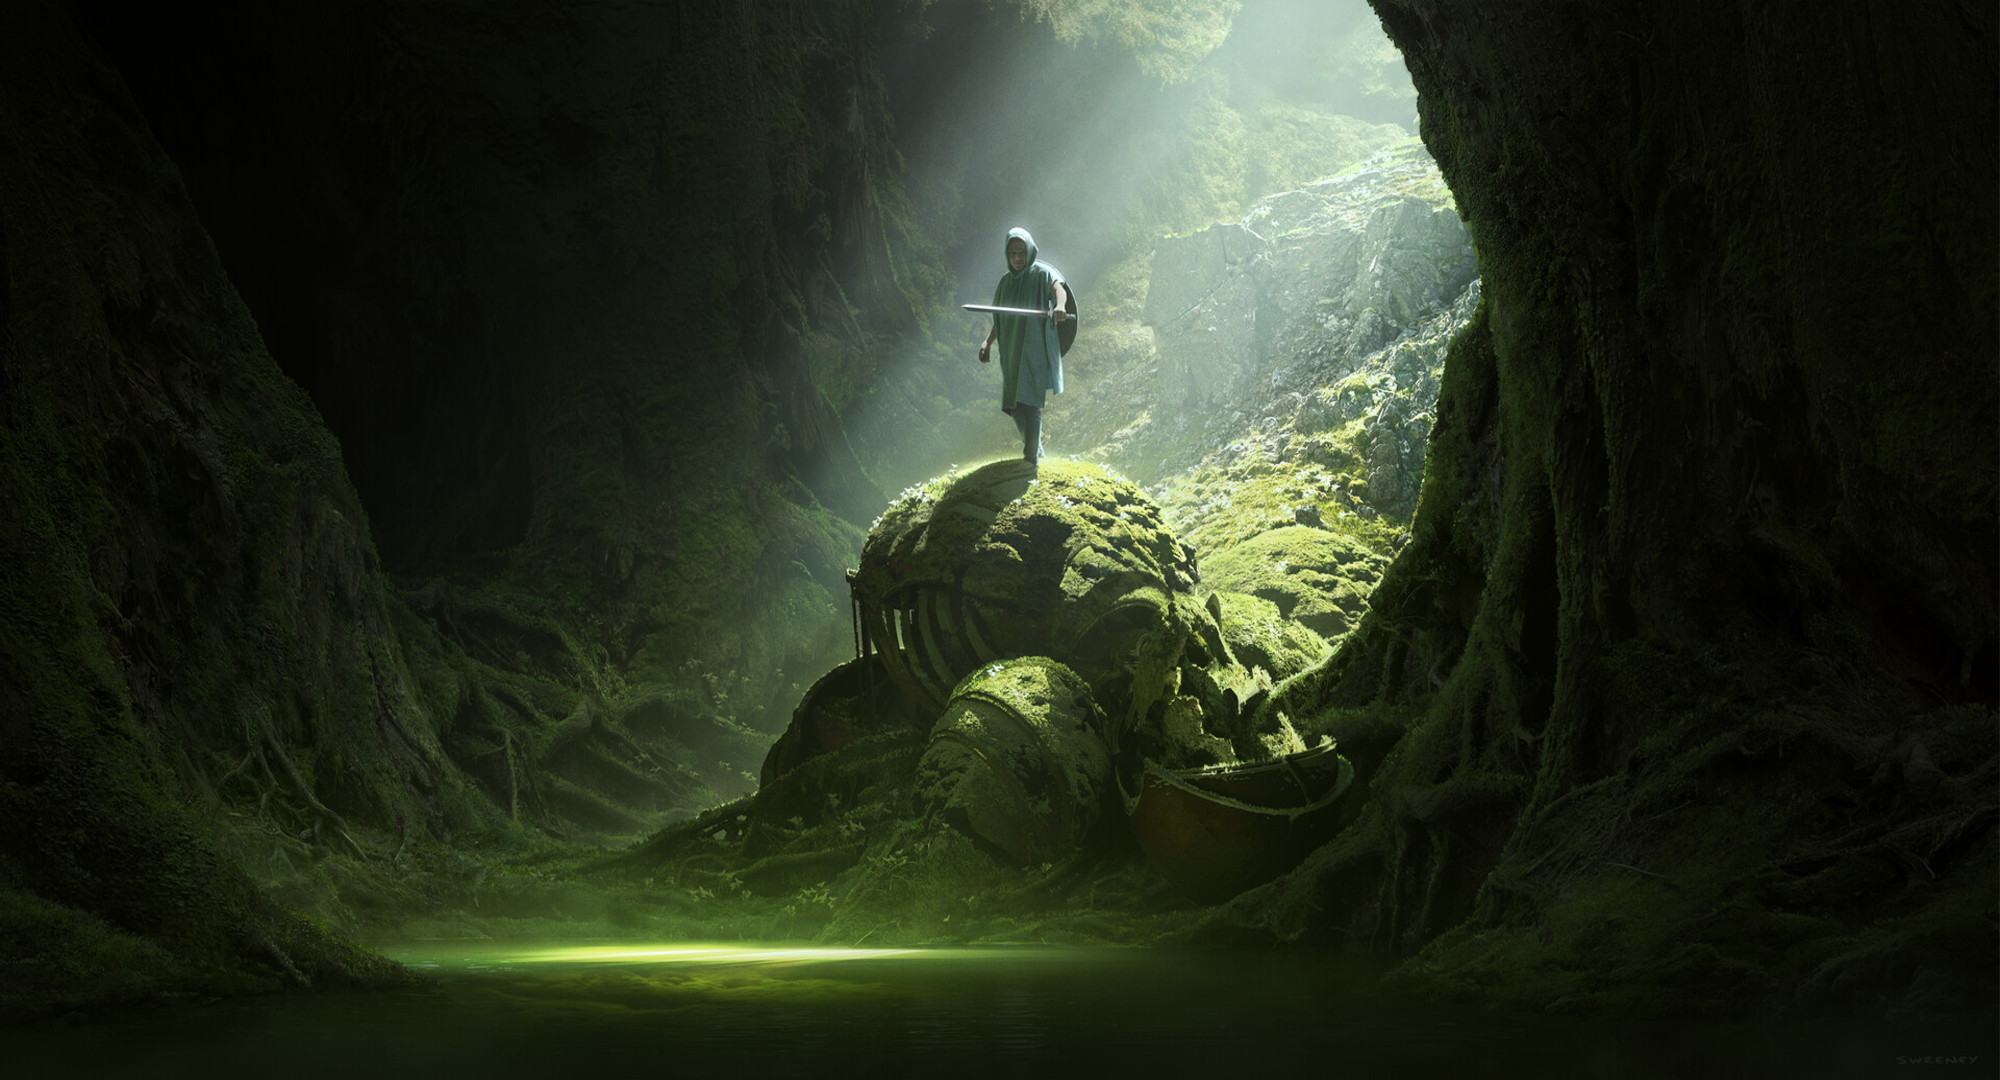 Adventurer entering a foreboding cave by John Sweeney